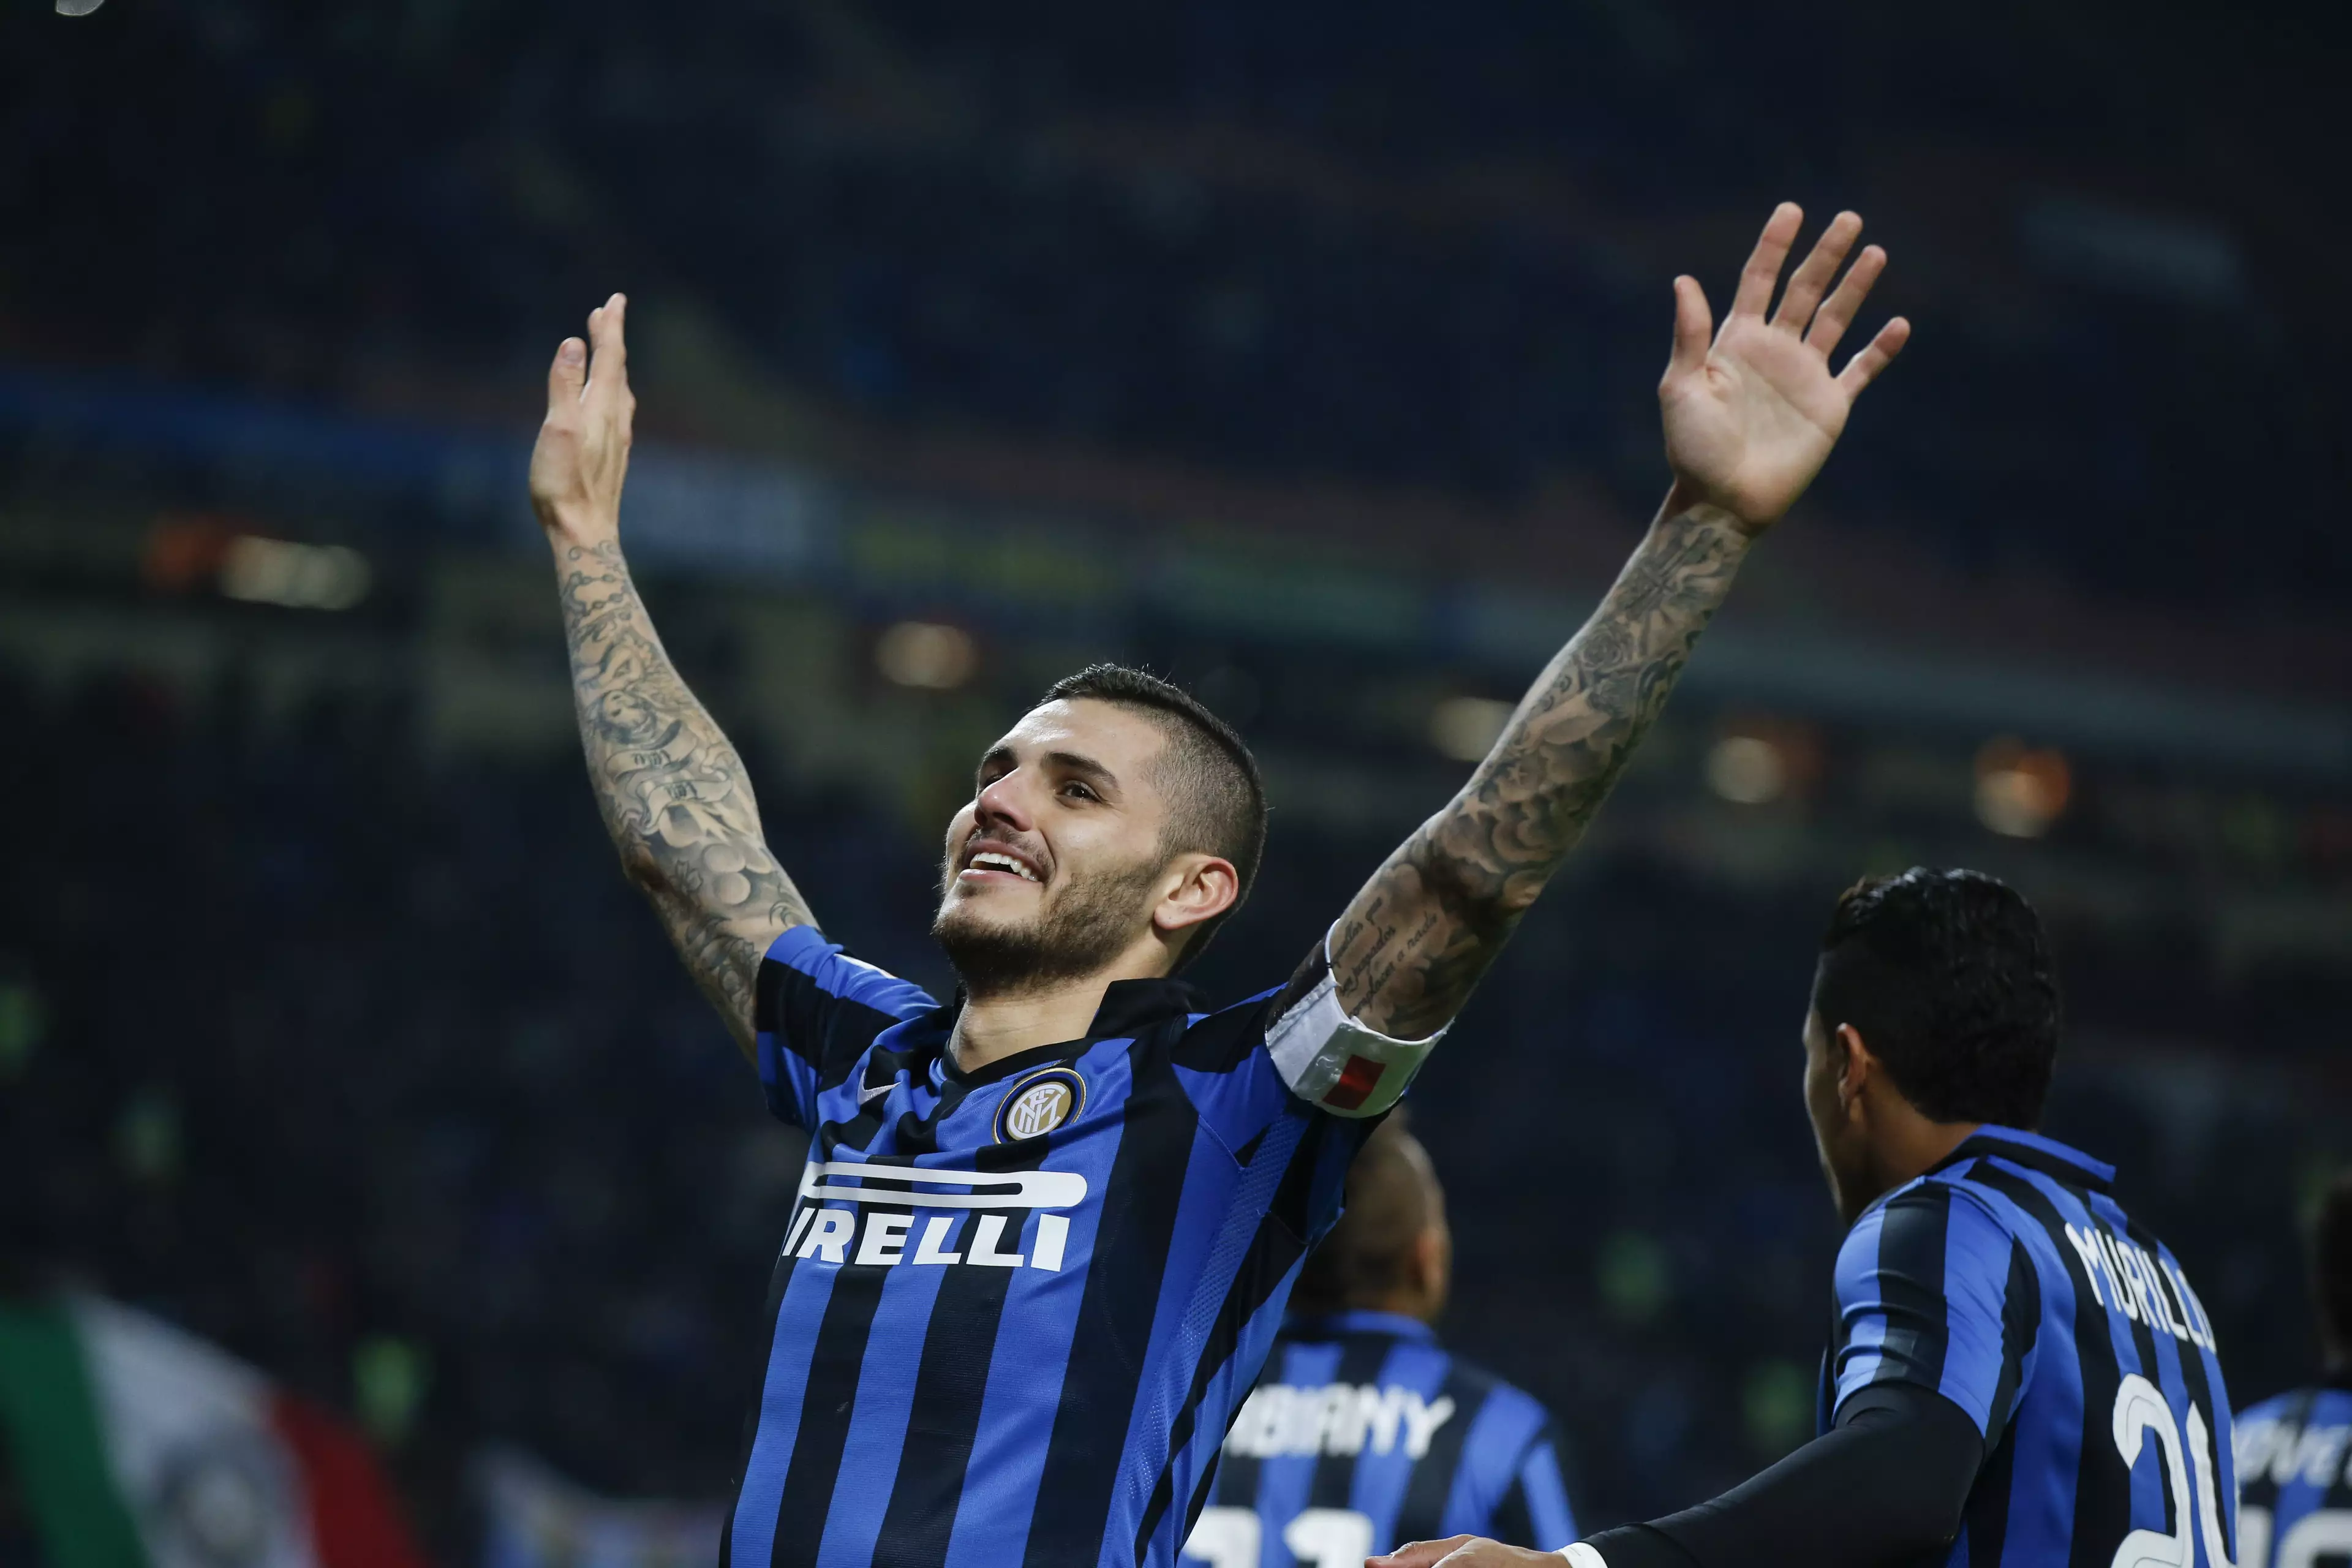 Mauro Icardi is one of the most highly rated forwards in Europe. Image: PA Images